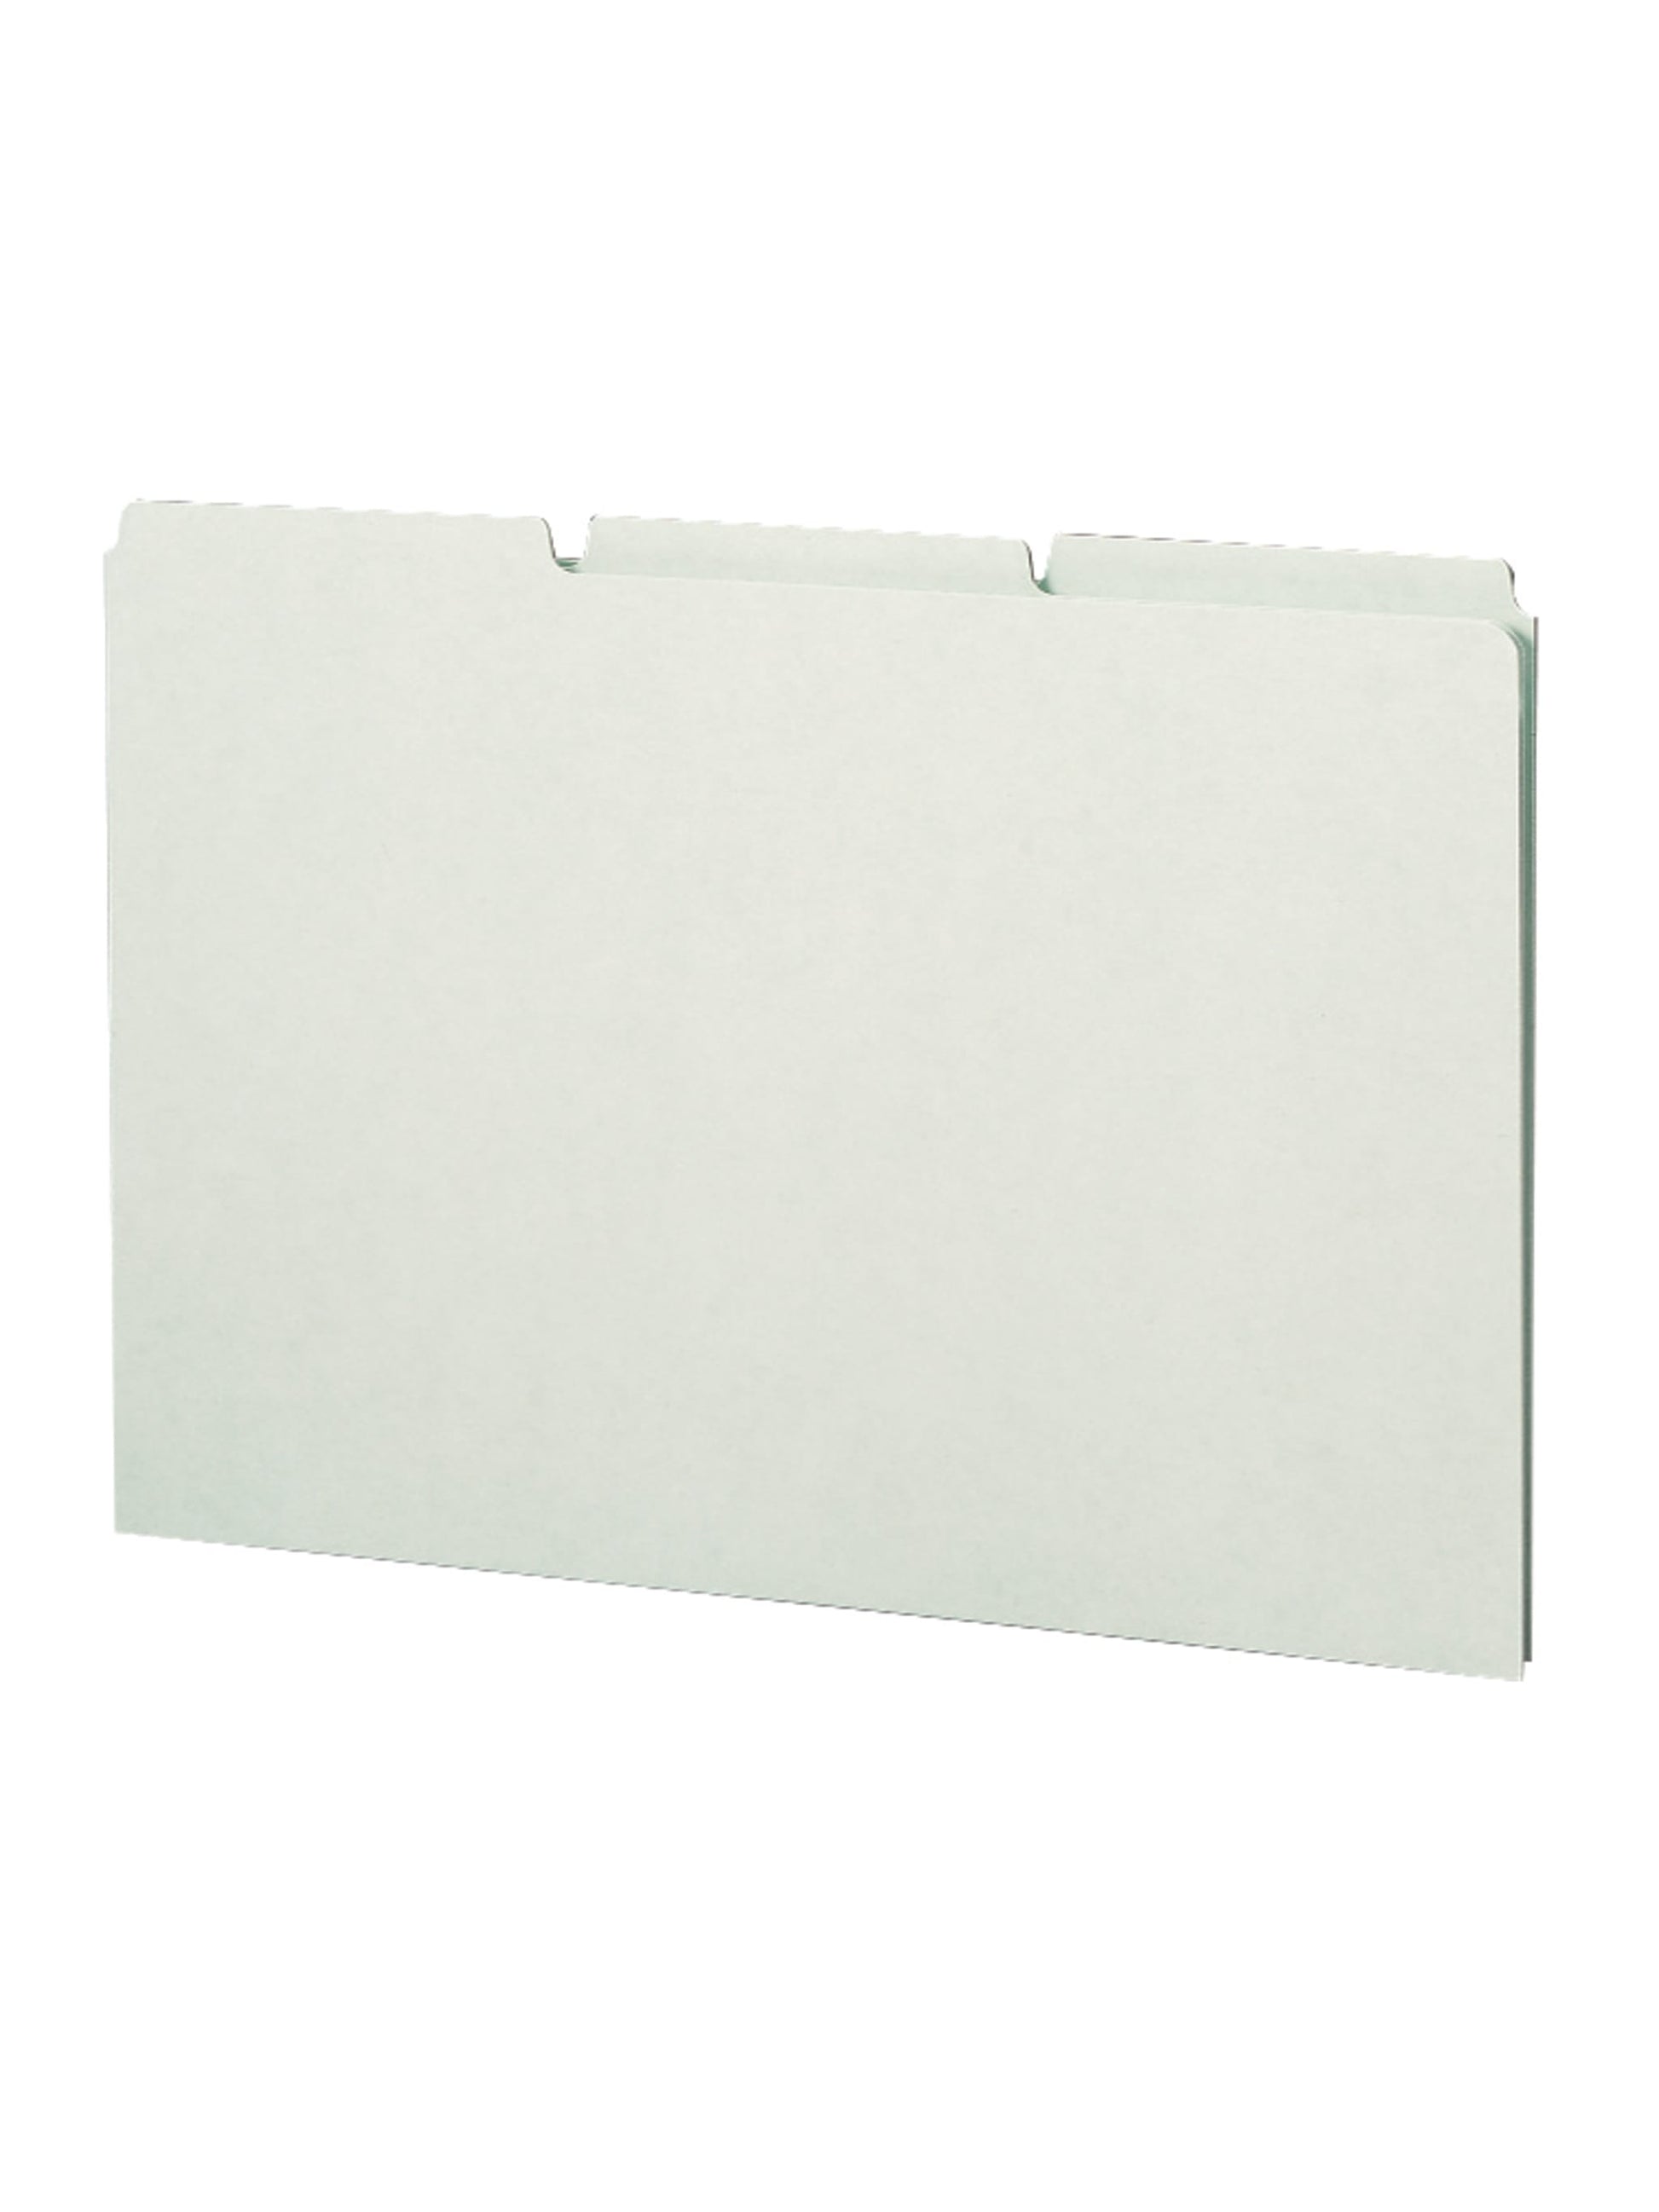 Heavyweight Filing Guides with Blank Tabs, Gray/Green Color, Legal Size, Set of 50, 086486523349